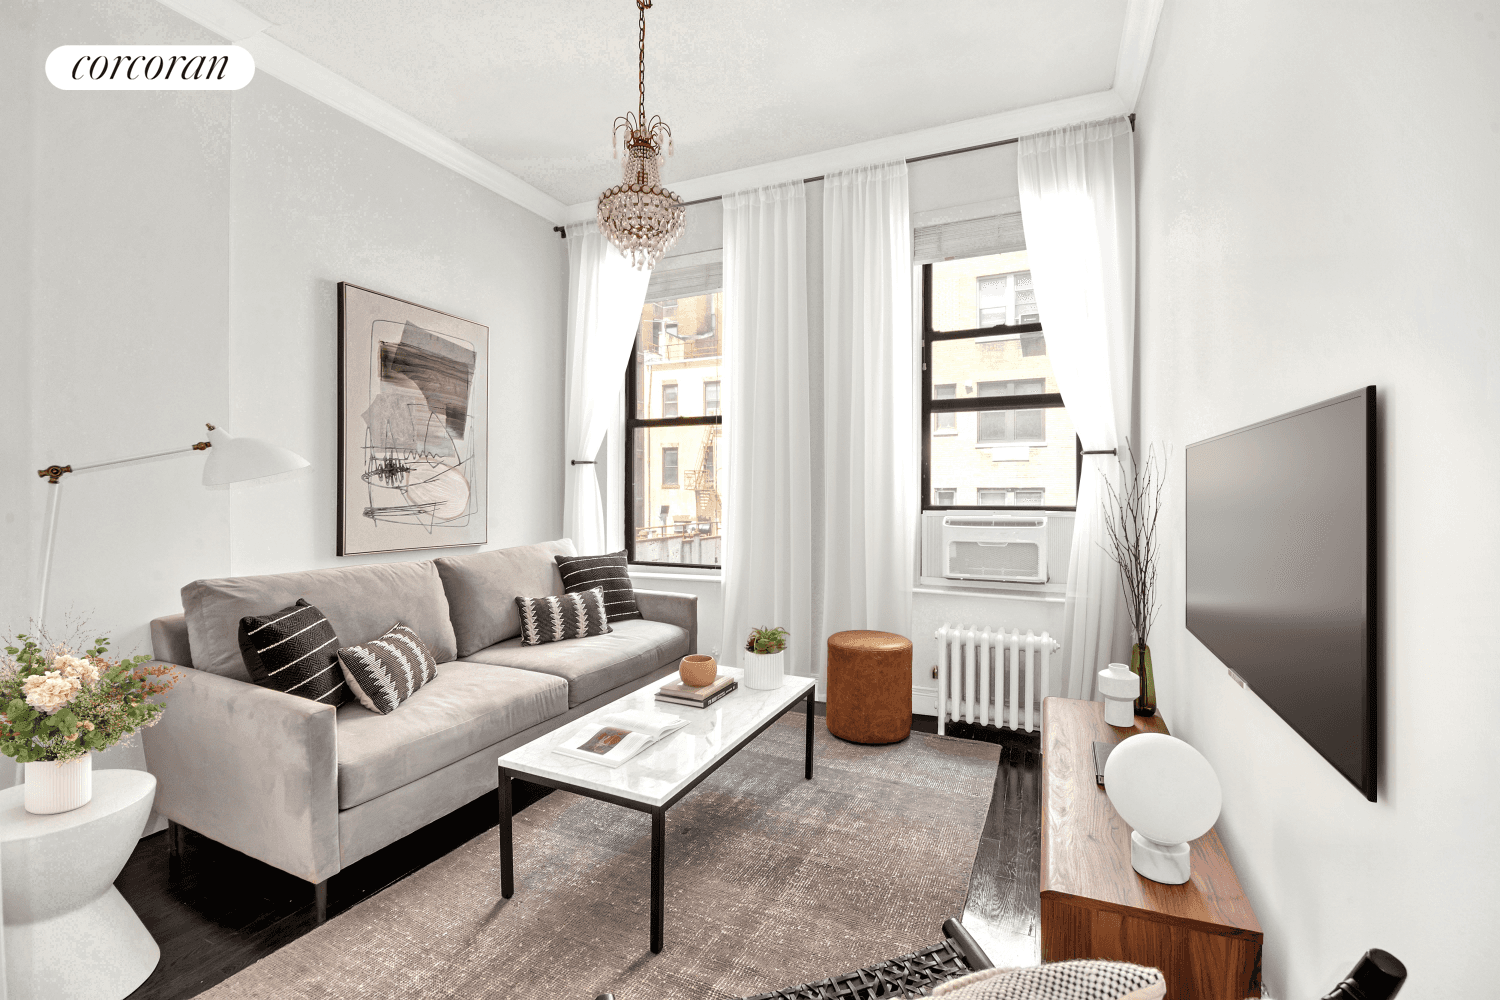 NEW PRICE ! Welcome to 329 West 85th Street, Apartment 4B, the best deal in the Upper West Side !